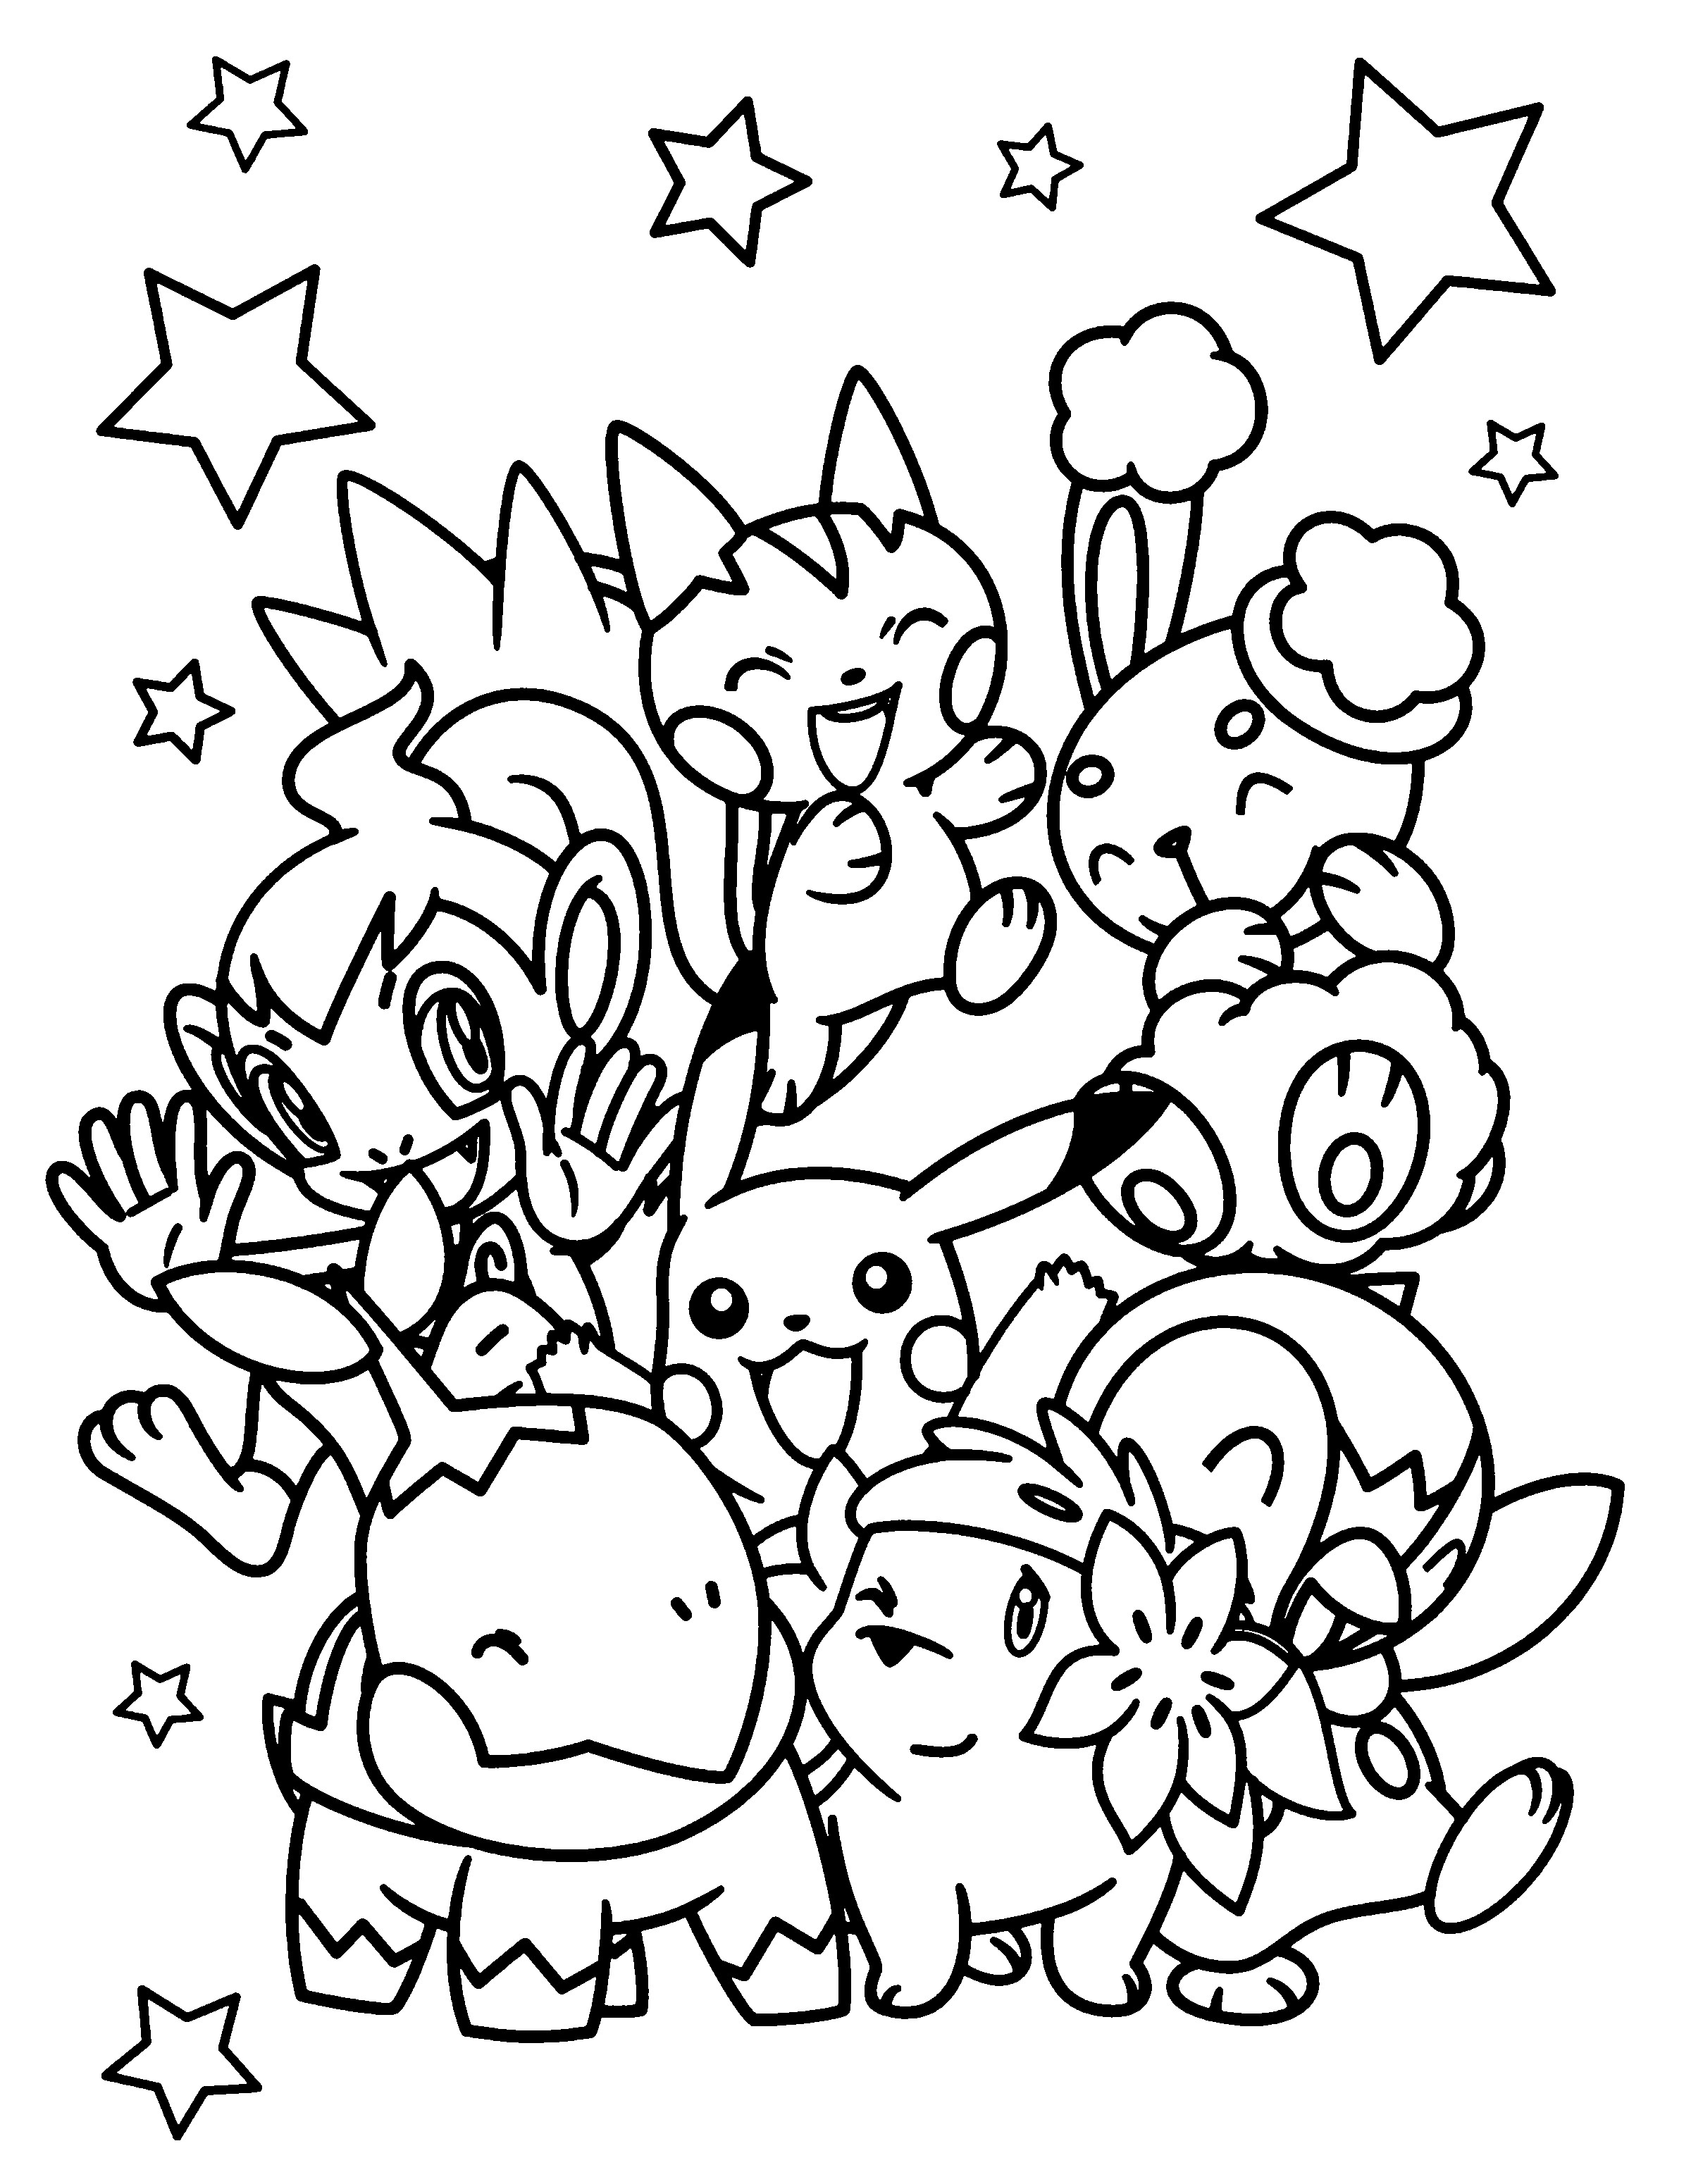 Pokemon Coloring Pages For Kids
 Pokemon free to color for kids All Pokemon coloring